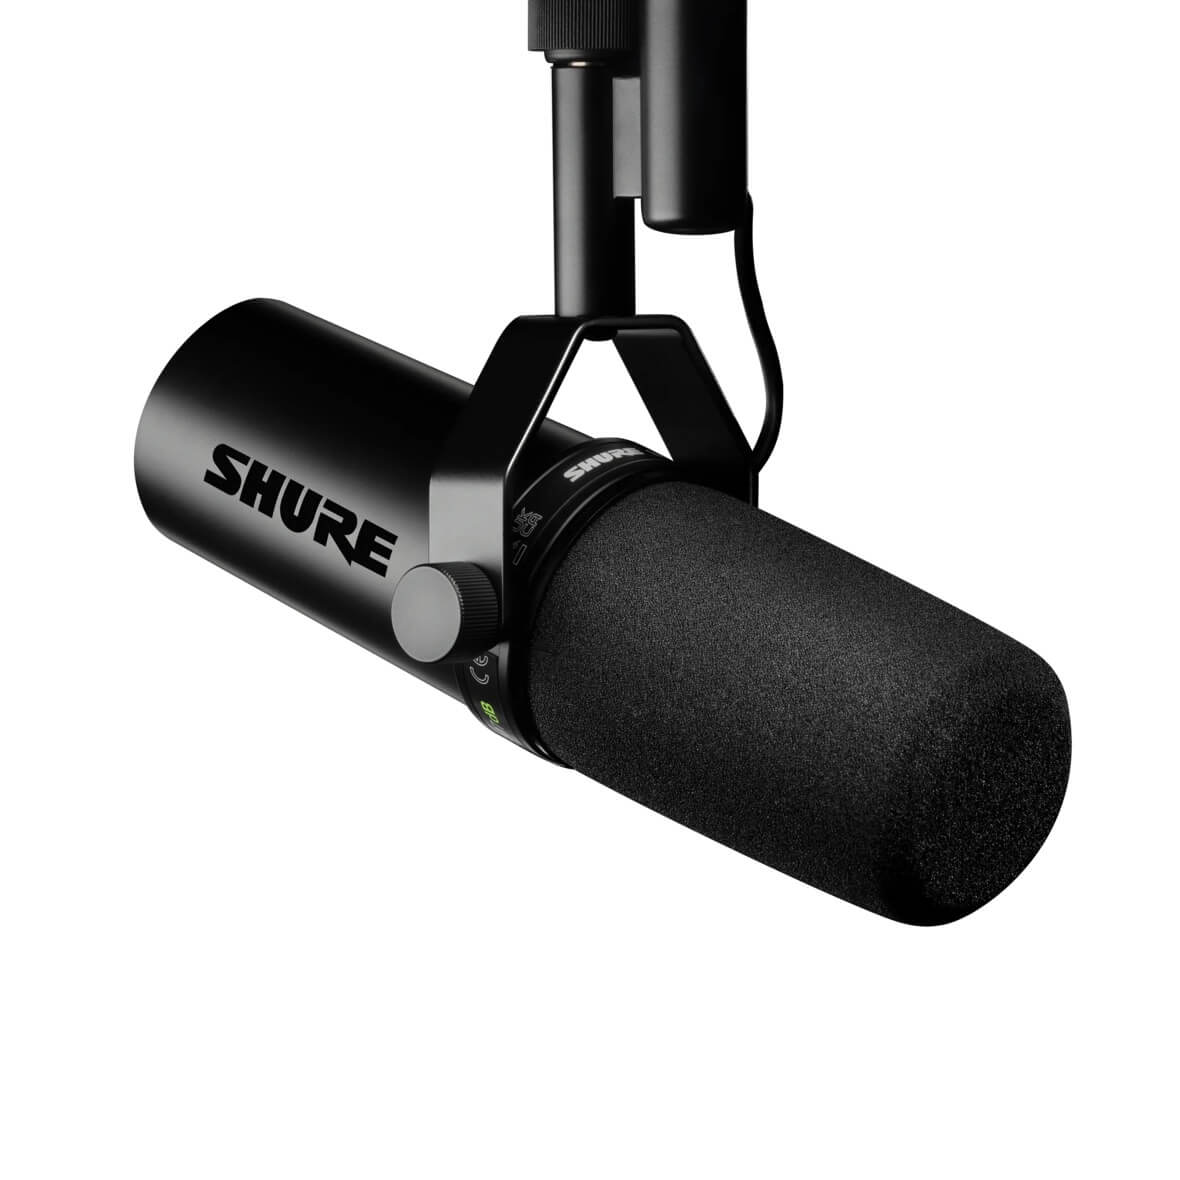 Recording vocals using the legendary Shure SM57 dynamic microphone